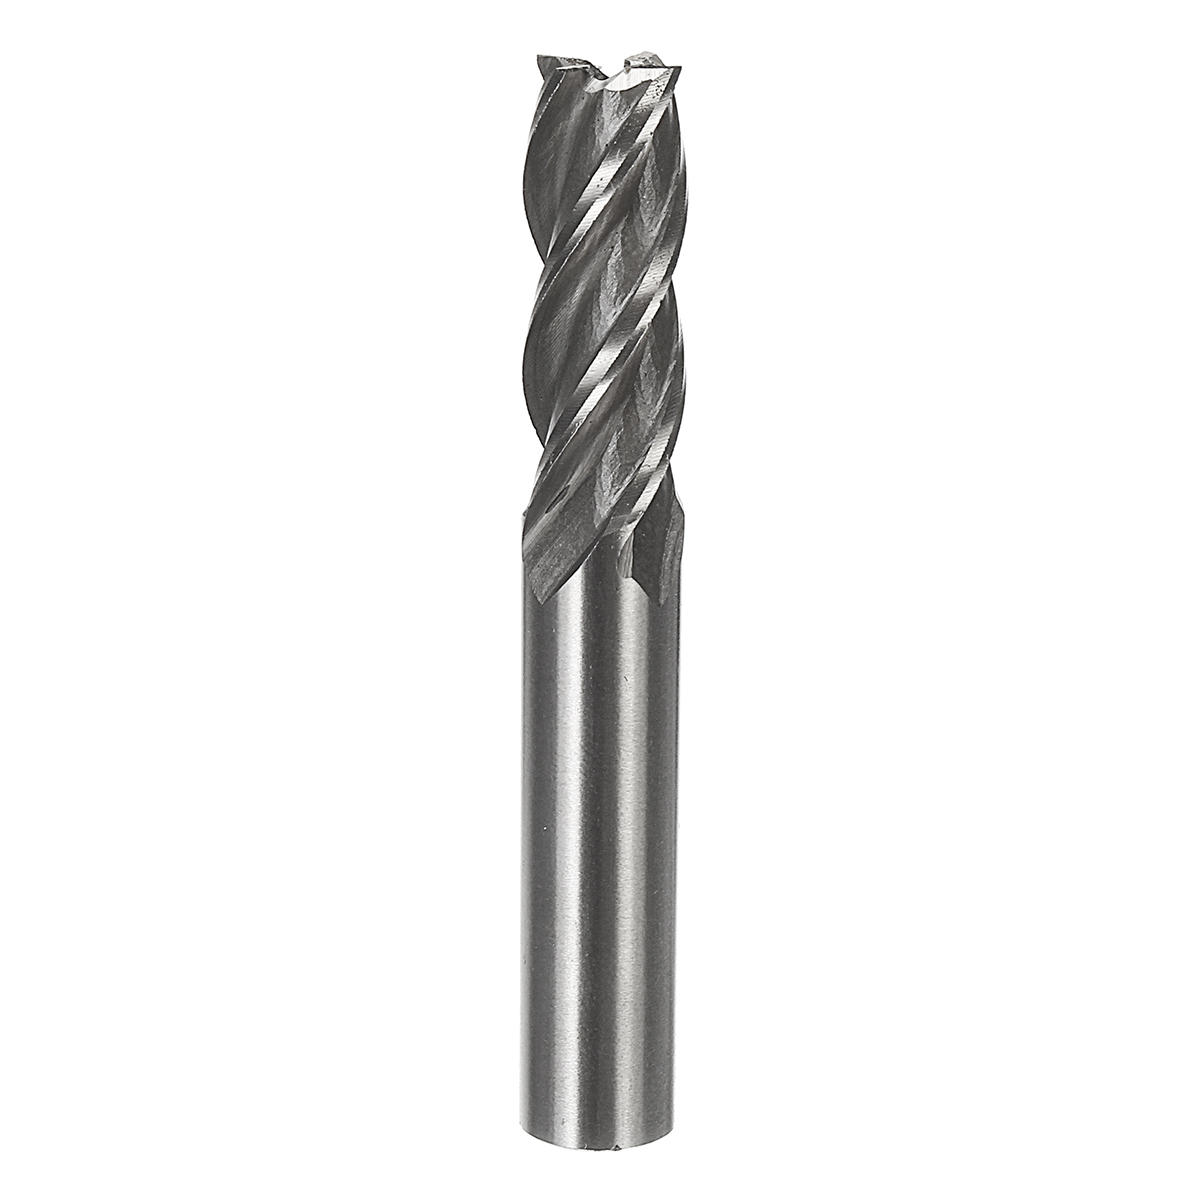 1//16/" Dia x 3//16/" Cut 4 Flute Square Carbide End Mill Made in USA 10-Pack A10